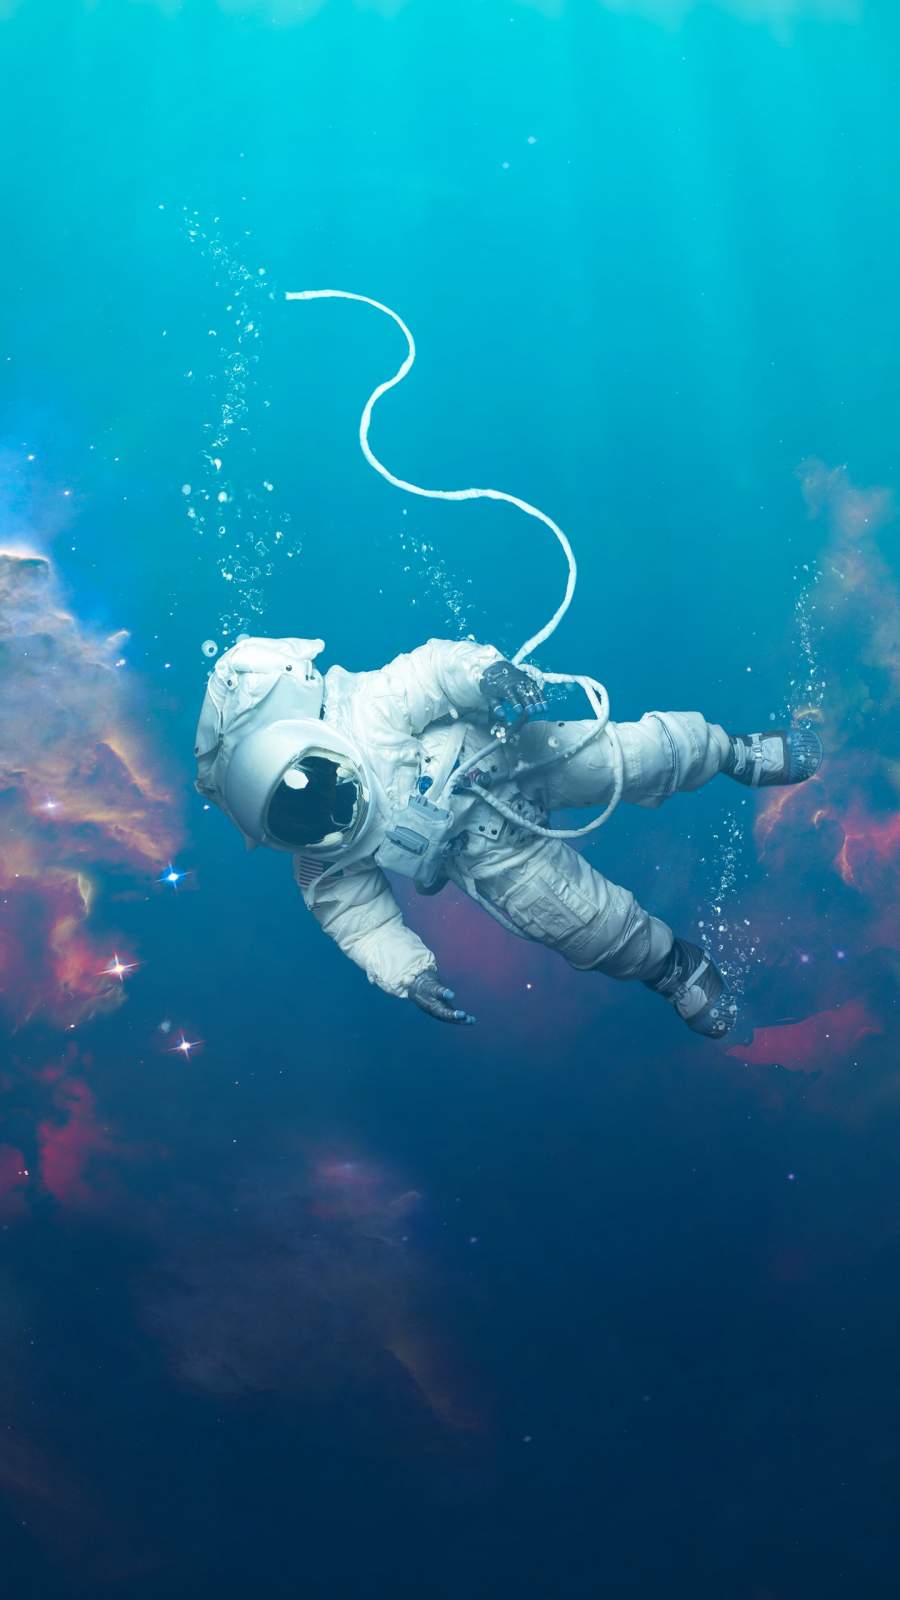 Lost Astronaut - iPhone Wallpapers